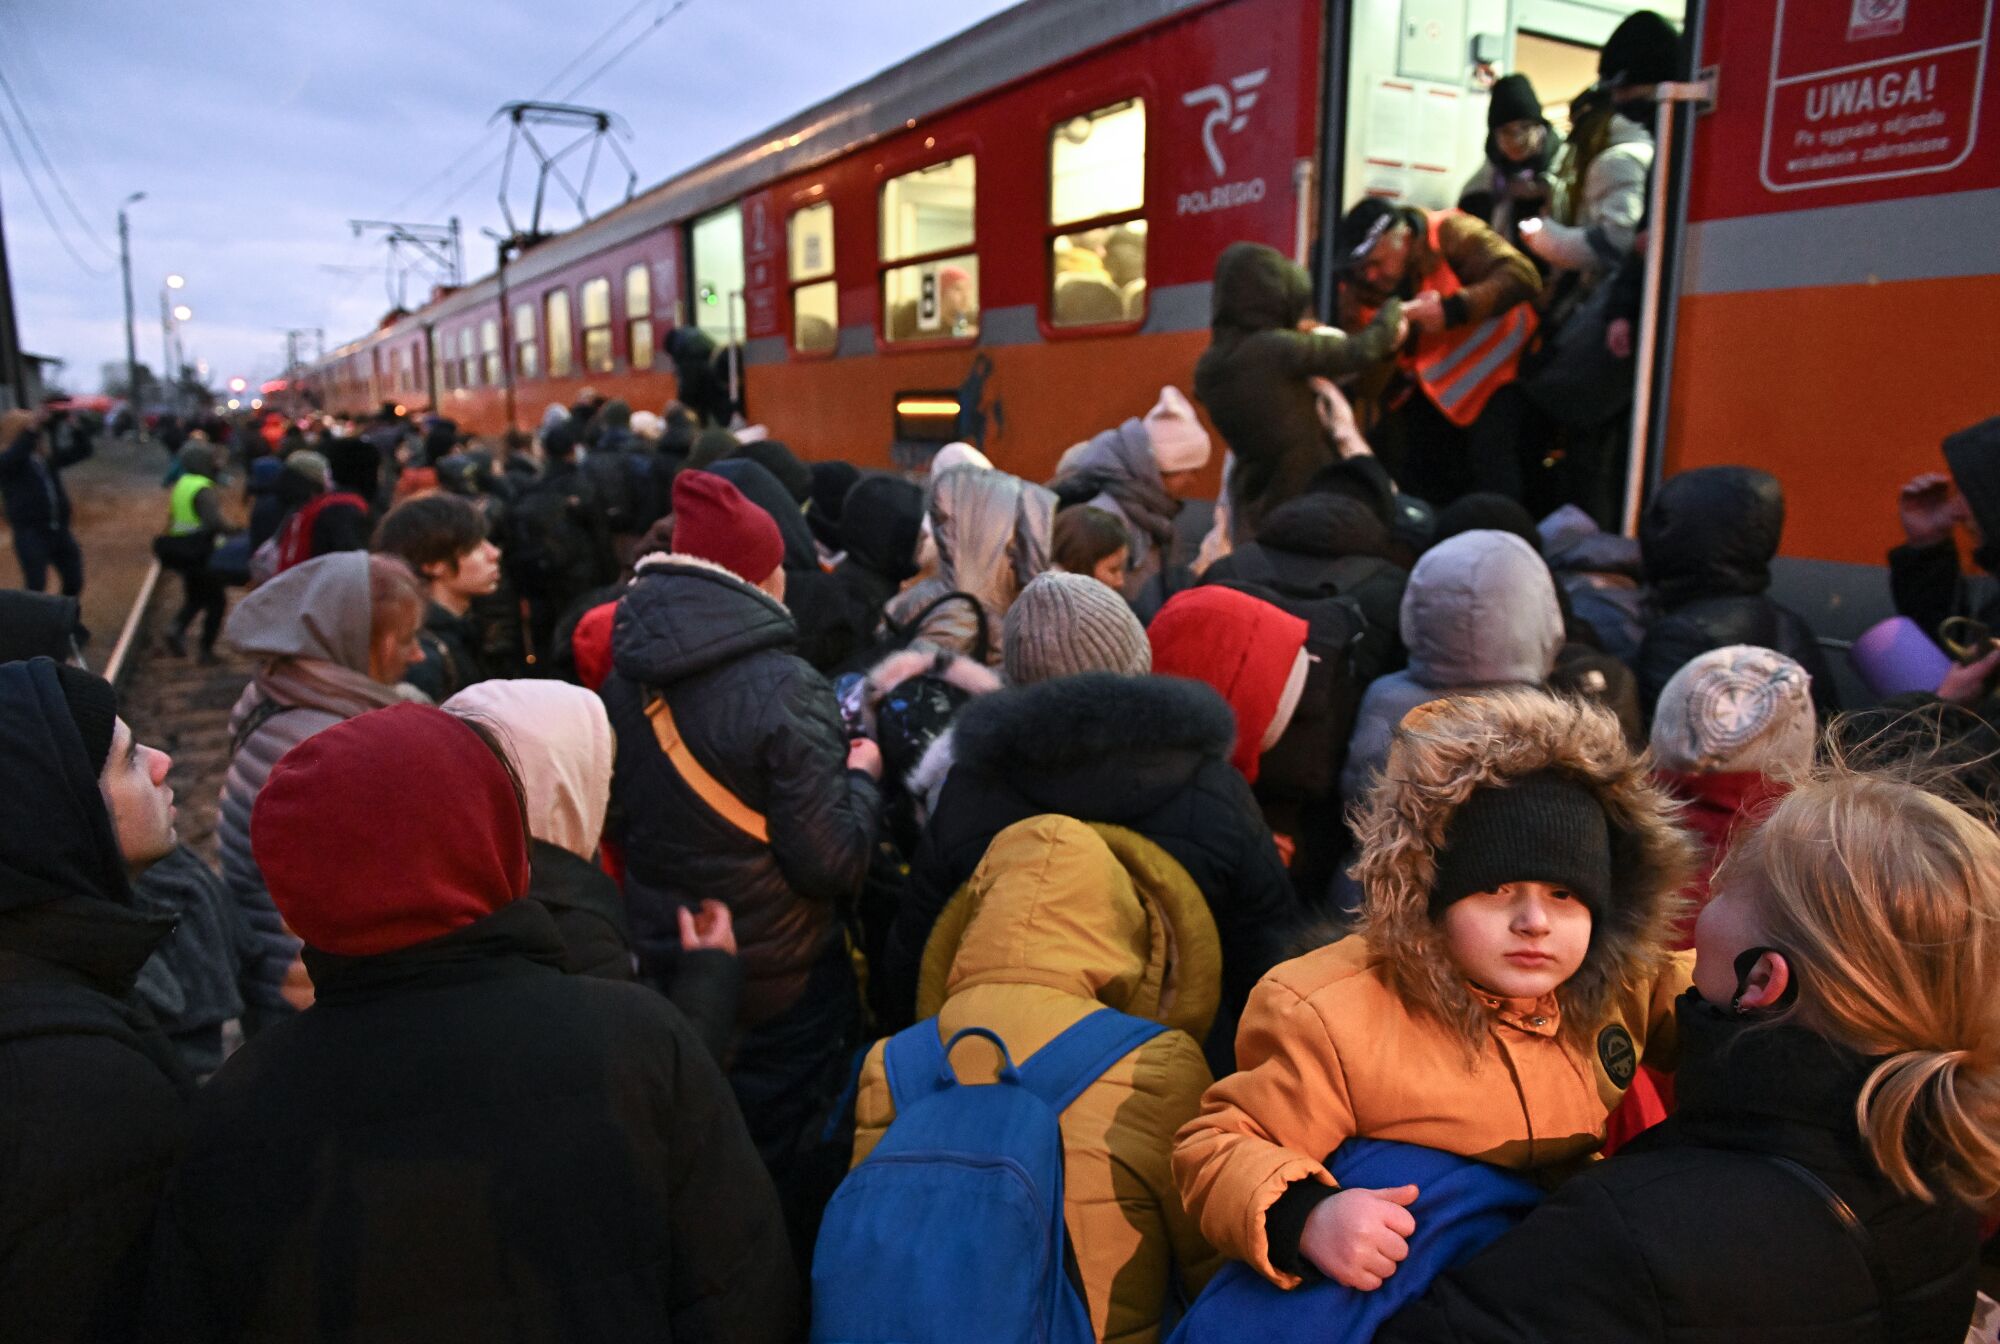 Ukrainian refugees board a train to Krakow after crossing the border in Medyka, Poland 